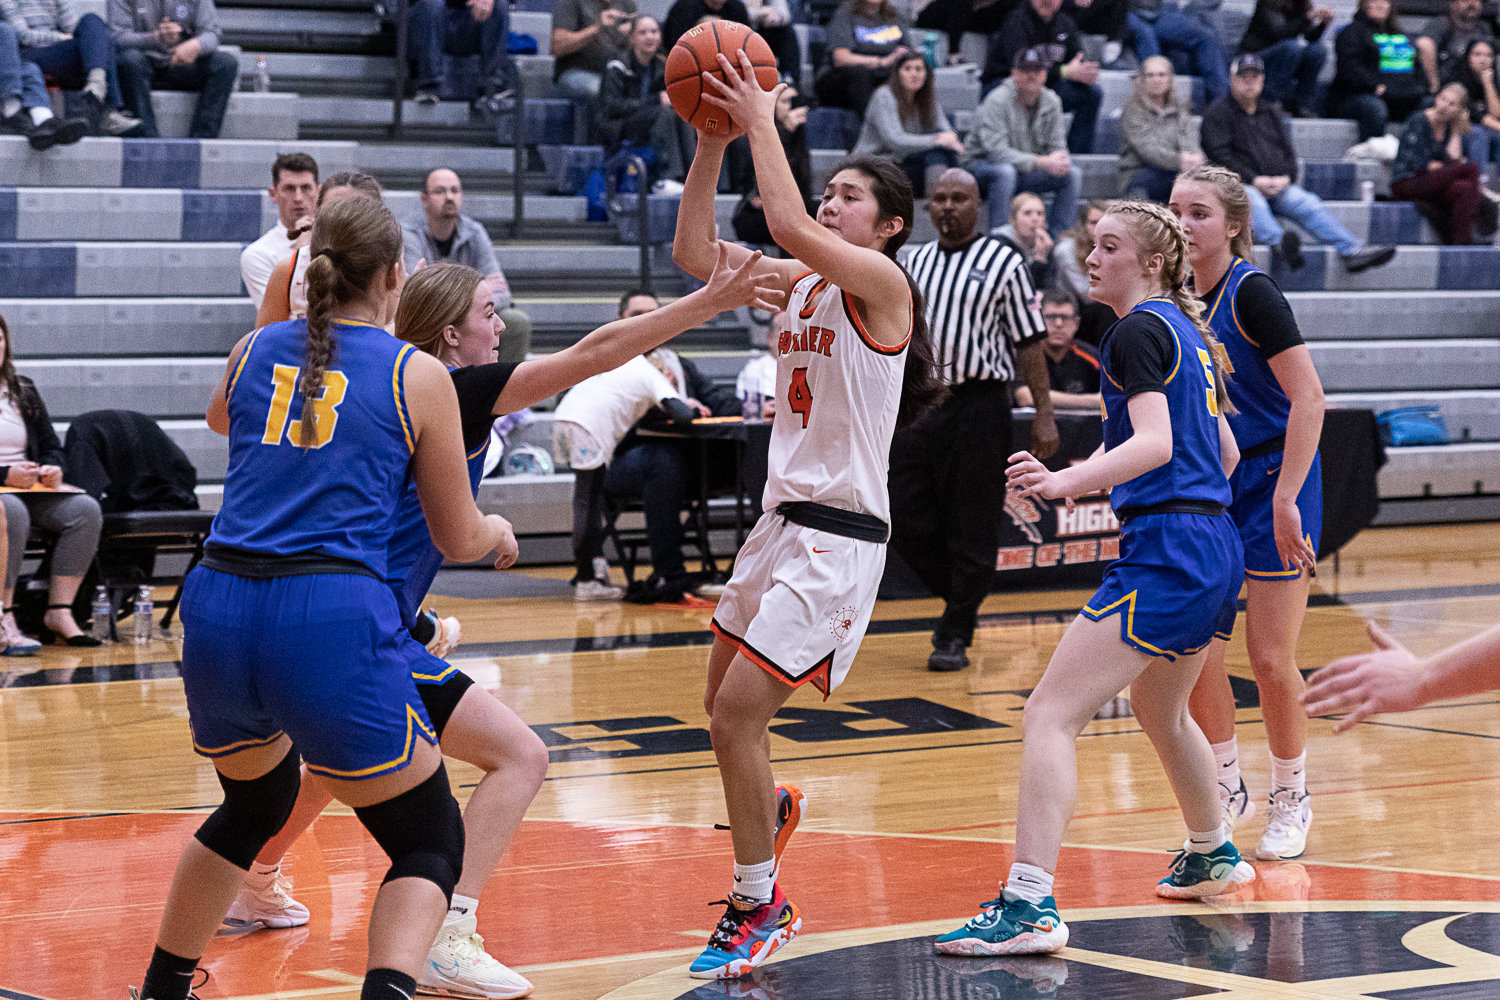 Rainier guard Angelica Askey drives for a floater in the lane against Adna Dec. 7.